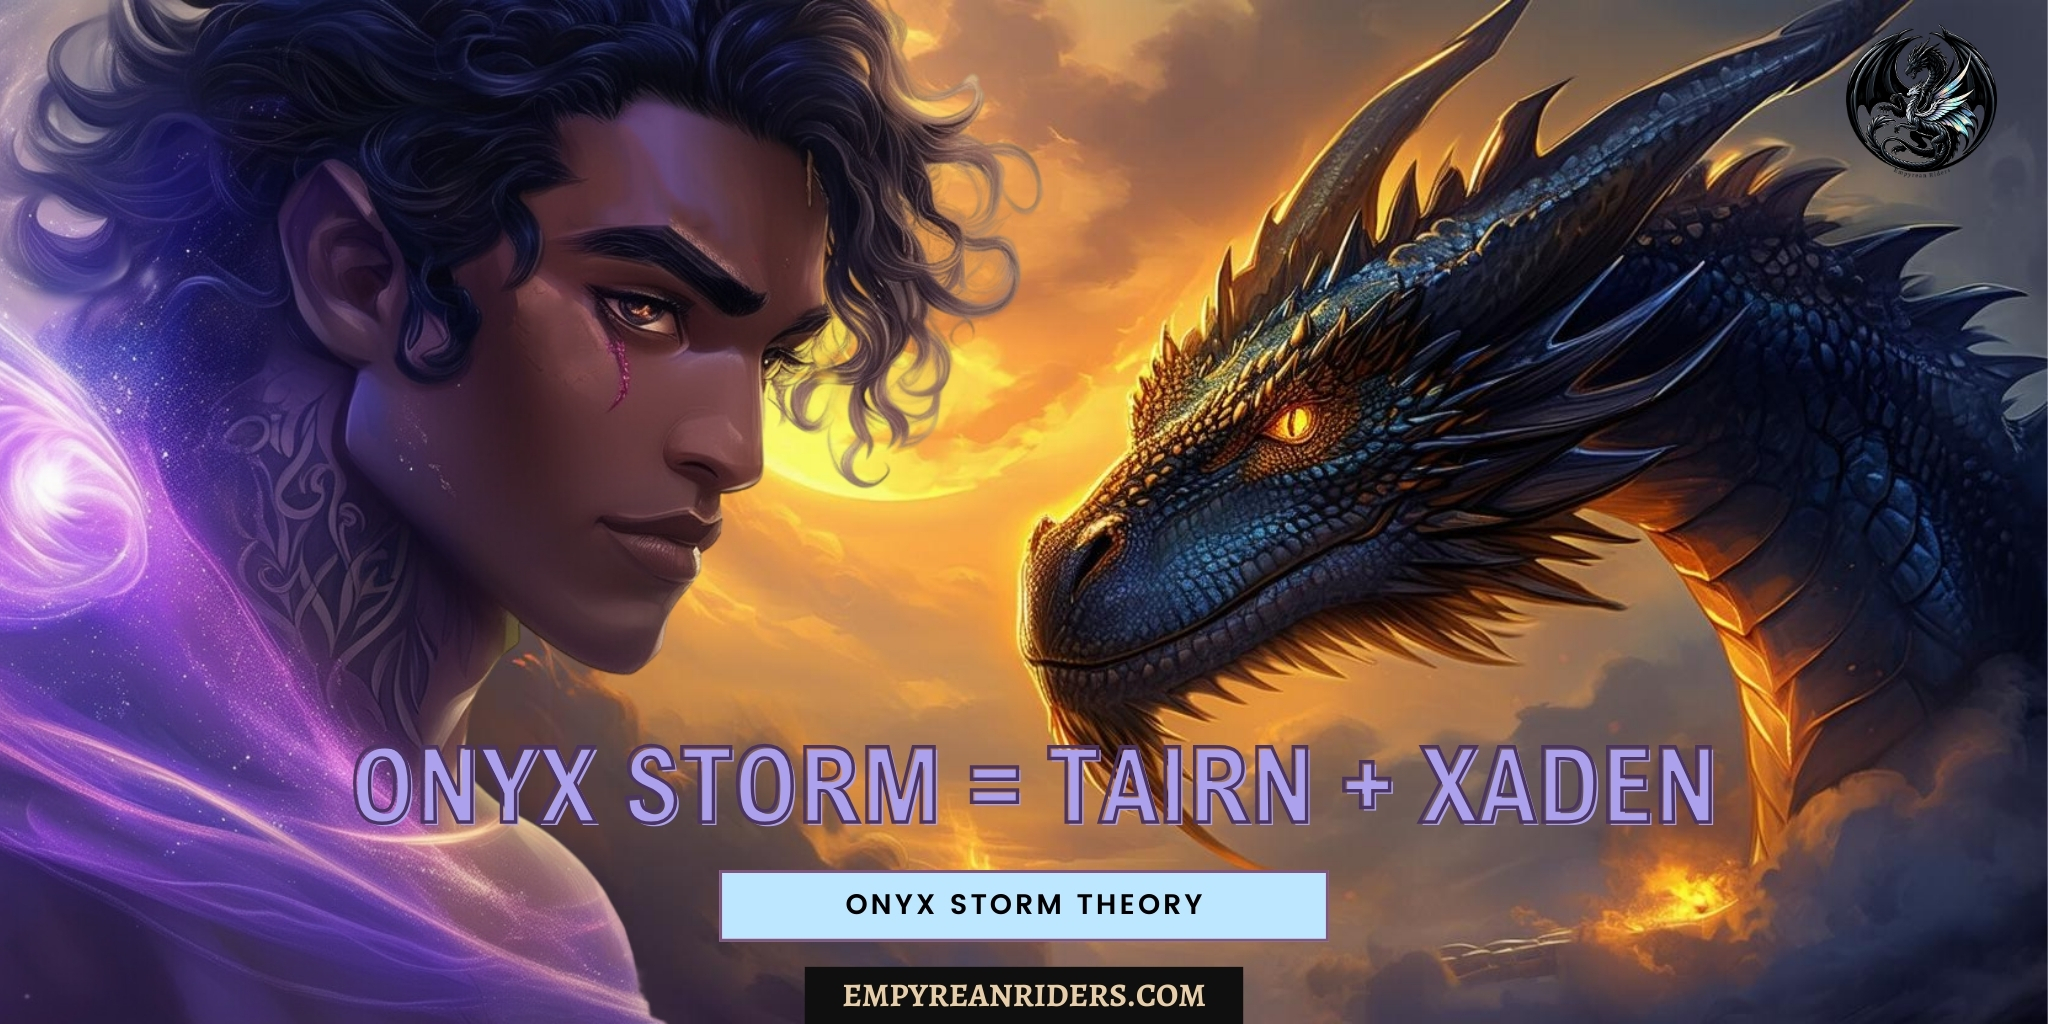 Onyx Storm Theory – Tairn is the Onyx, not Xaden